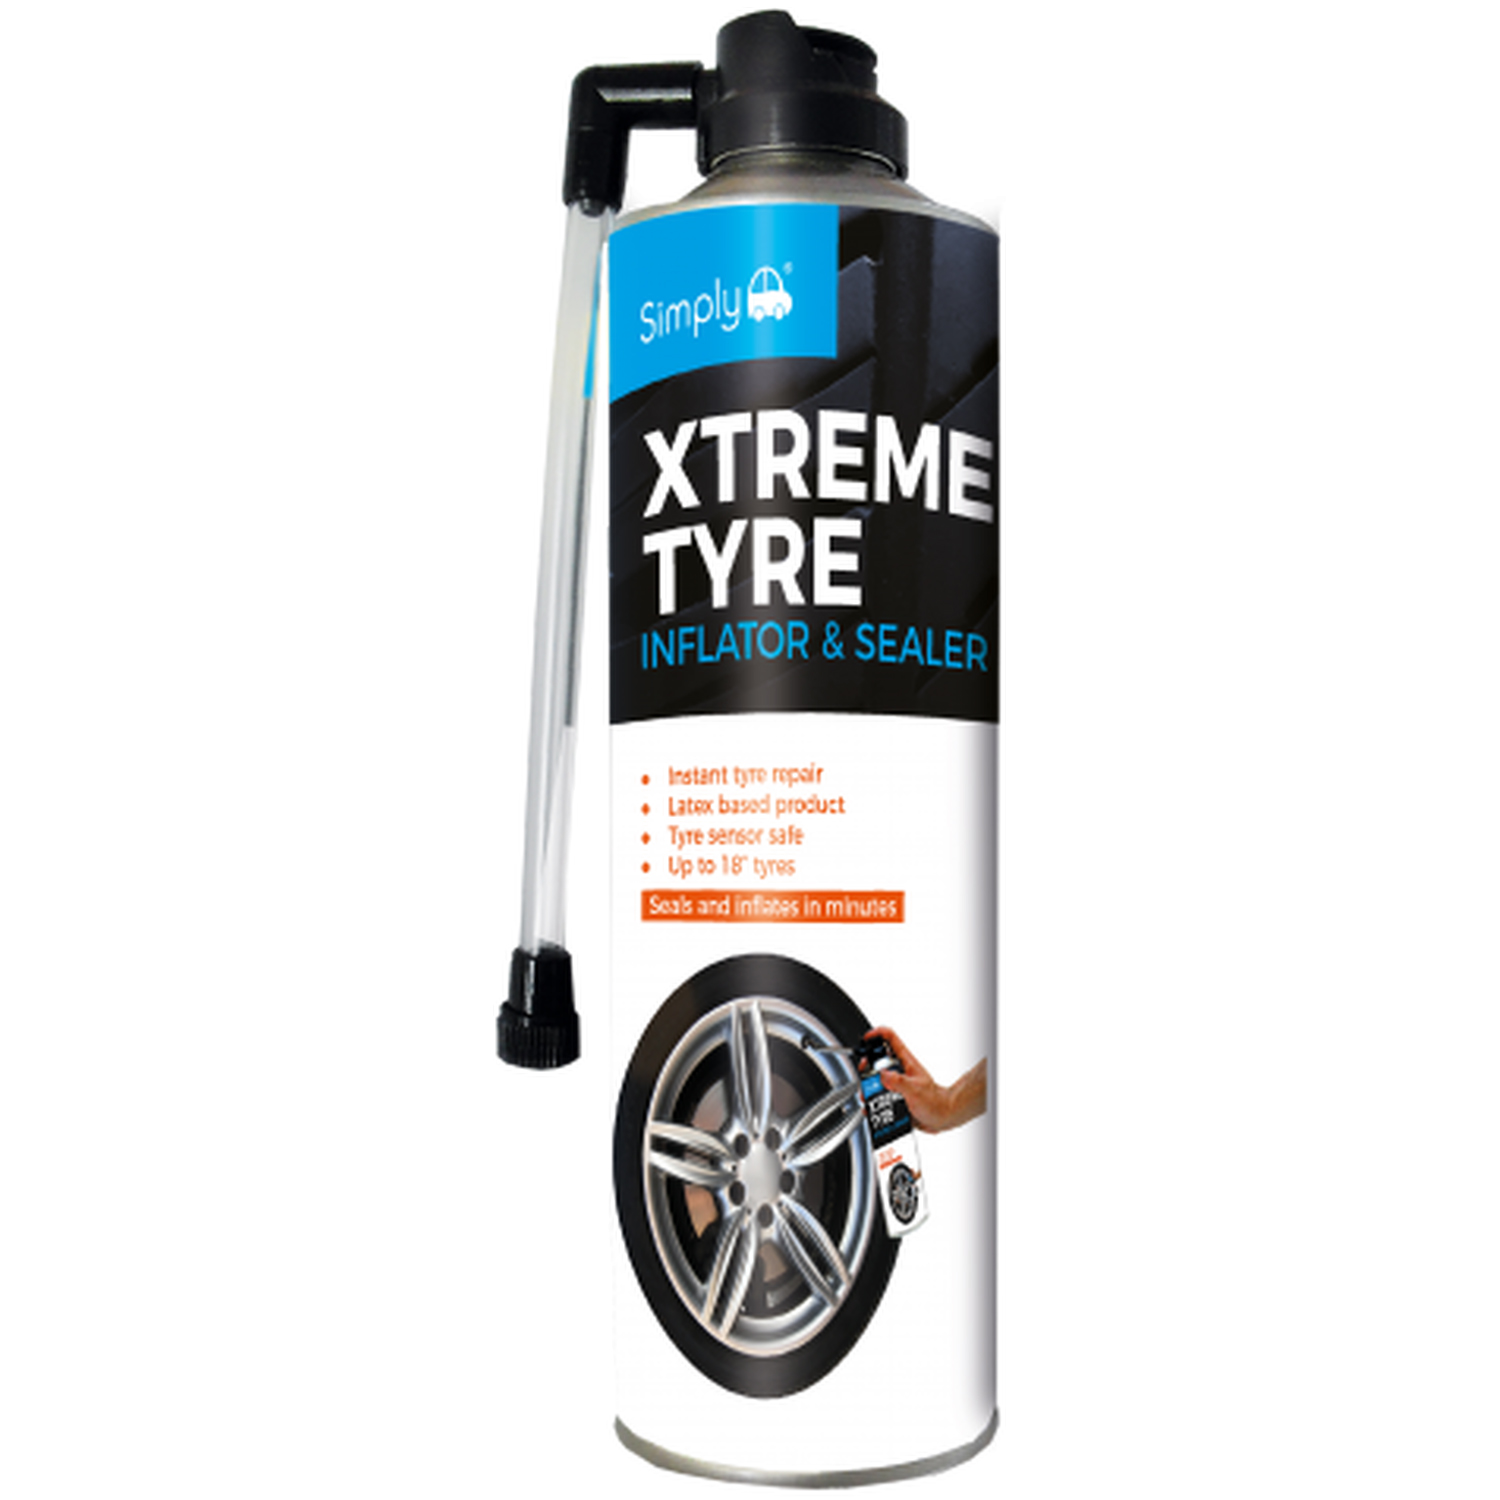 Simply Auto Xtreme Tyre Inflator and Sealer Image